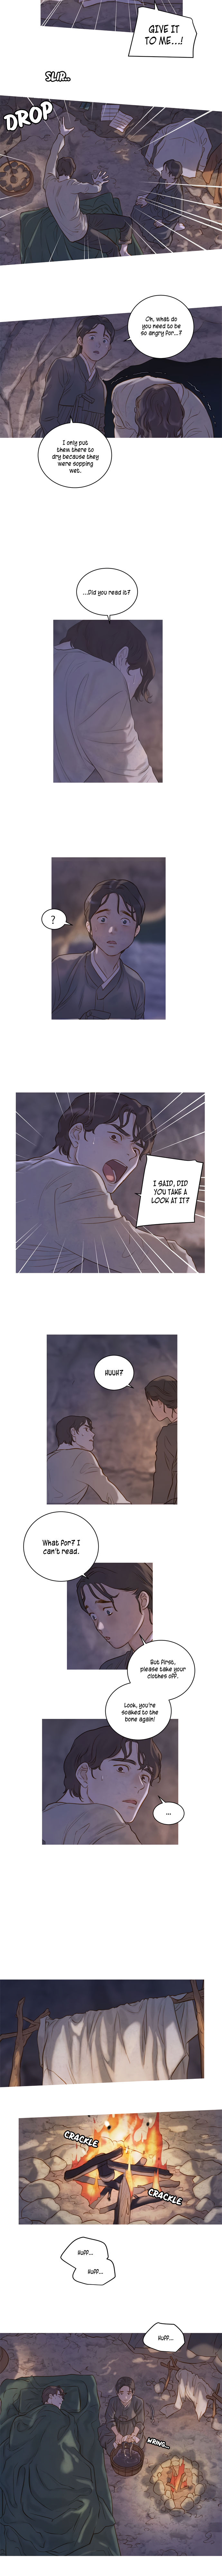 Gorae Byul - The Gyeongseong Mermaid - Chapter 3 Page 3